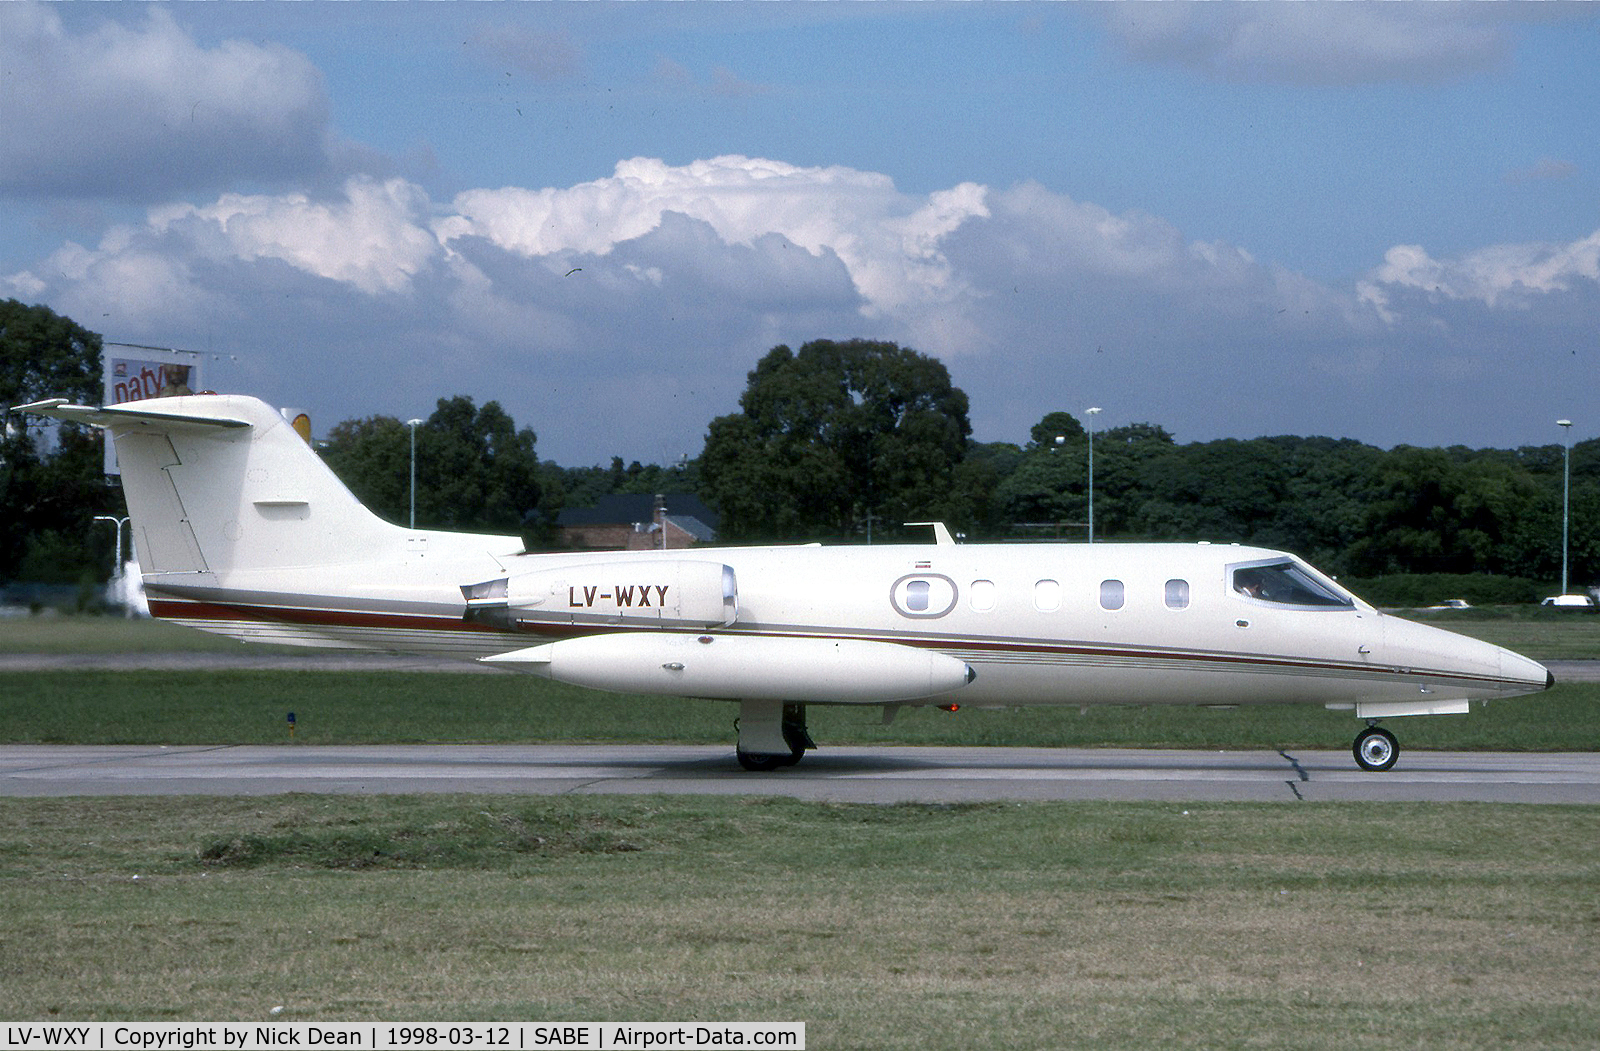 LV-WXY, 1982 Learjet 25G C/N 25G-357, SABE